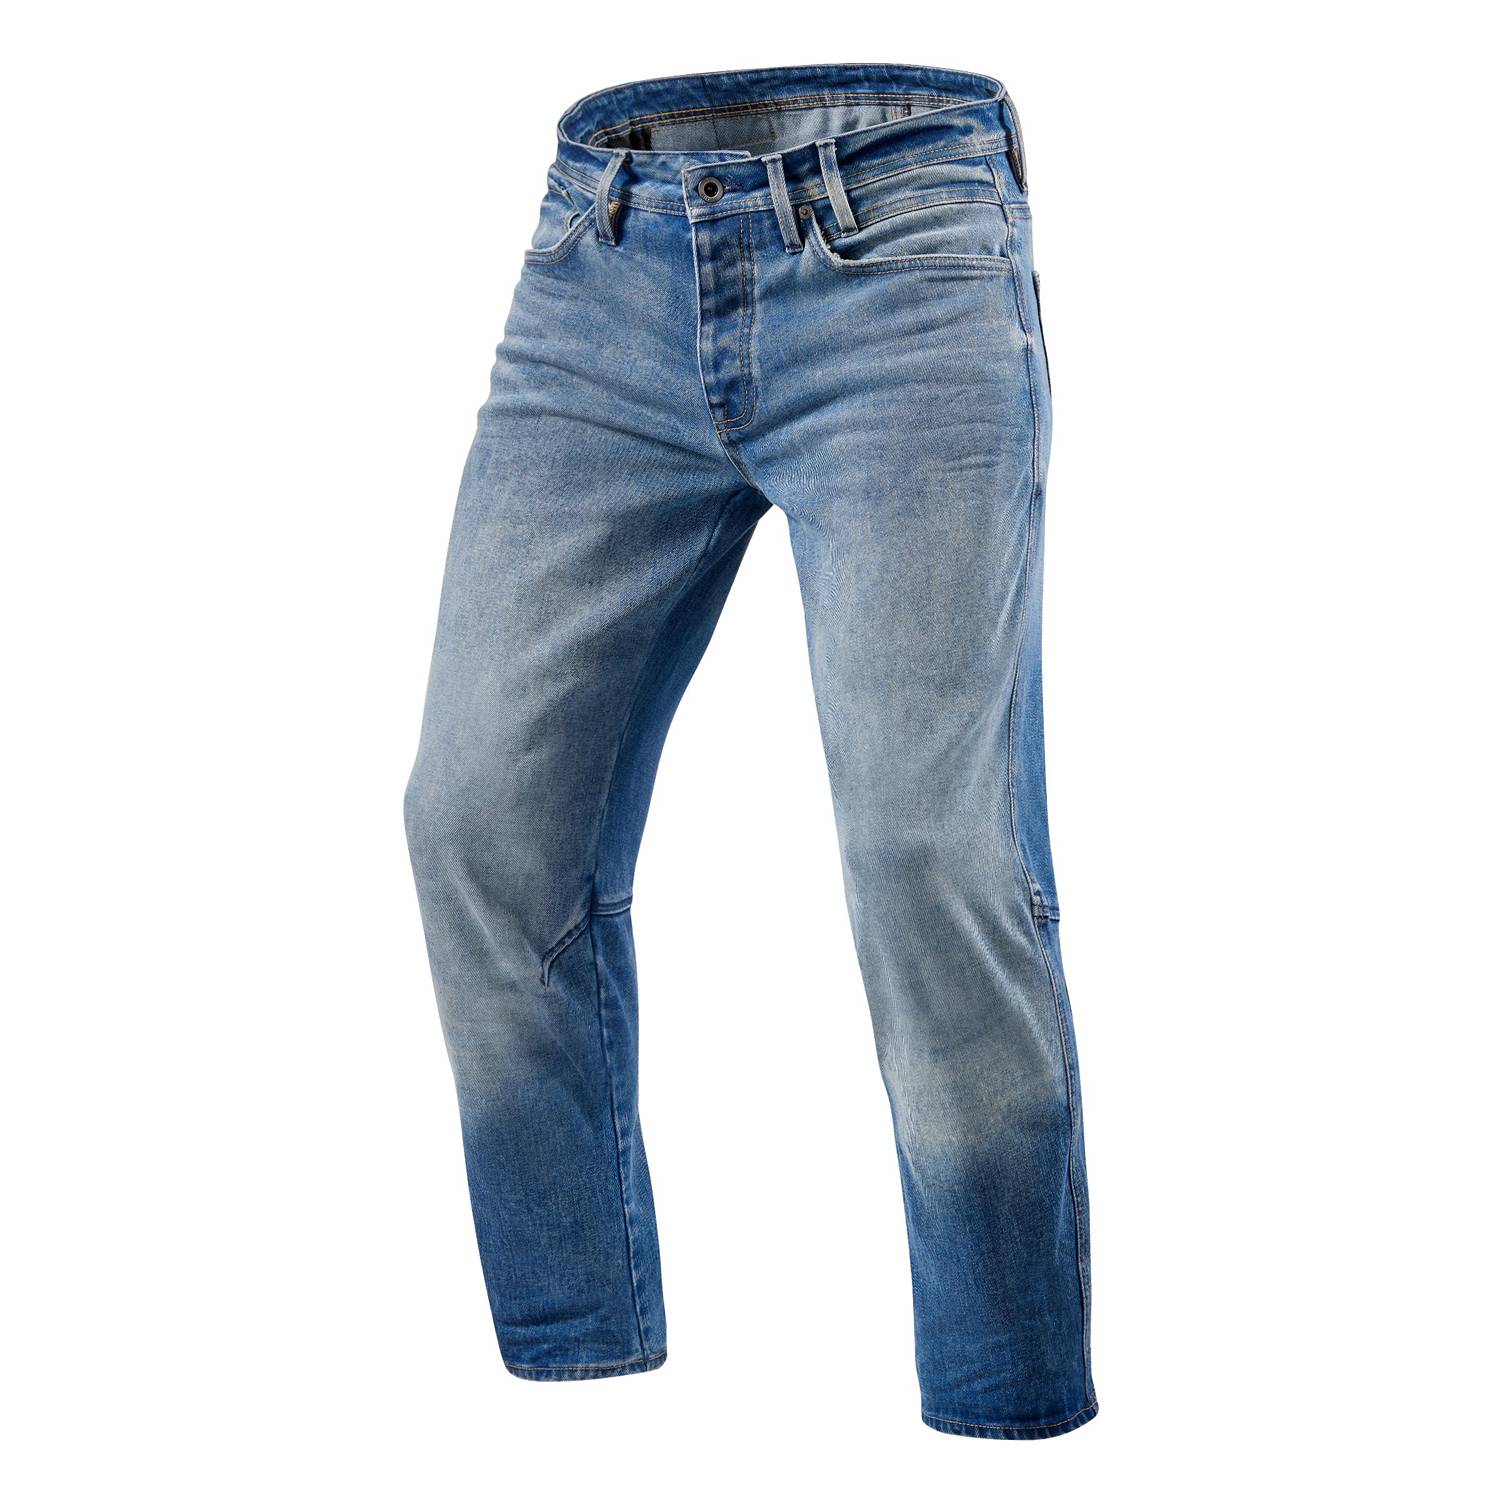 Image of REV'IT! Salt TF Mid Blue Used Motorcycle Jeans Talla L34/W30